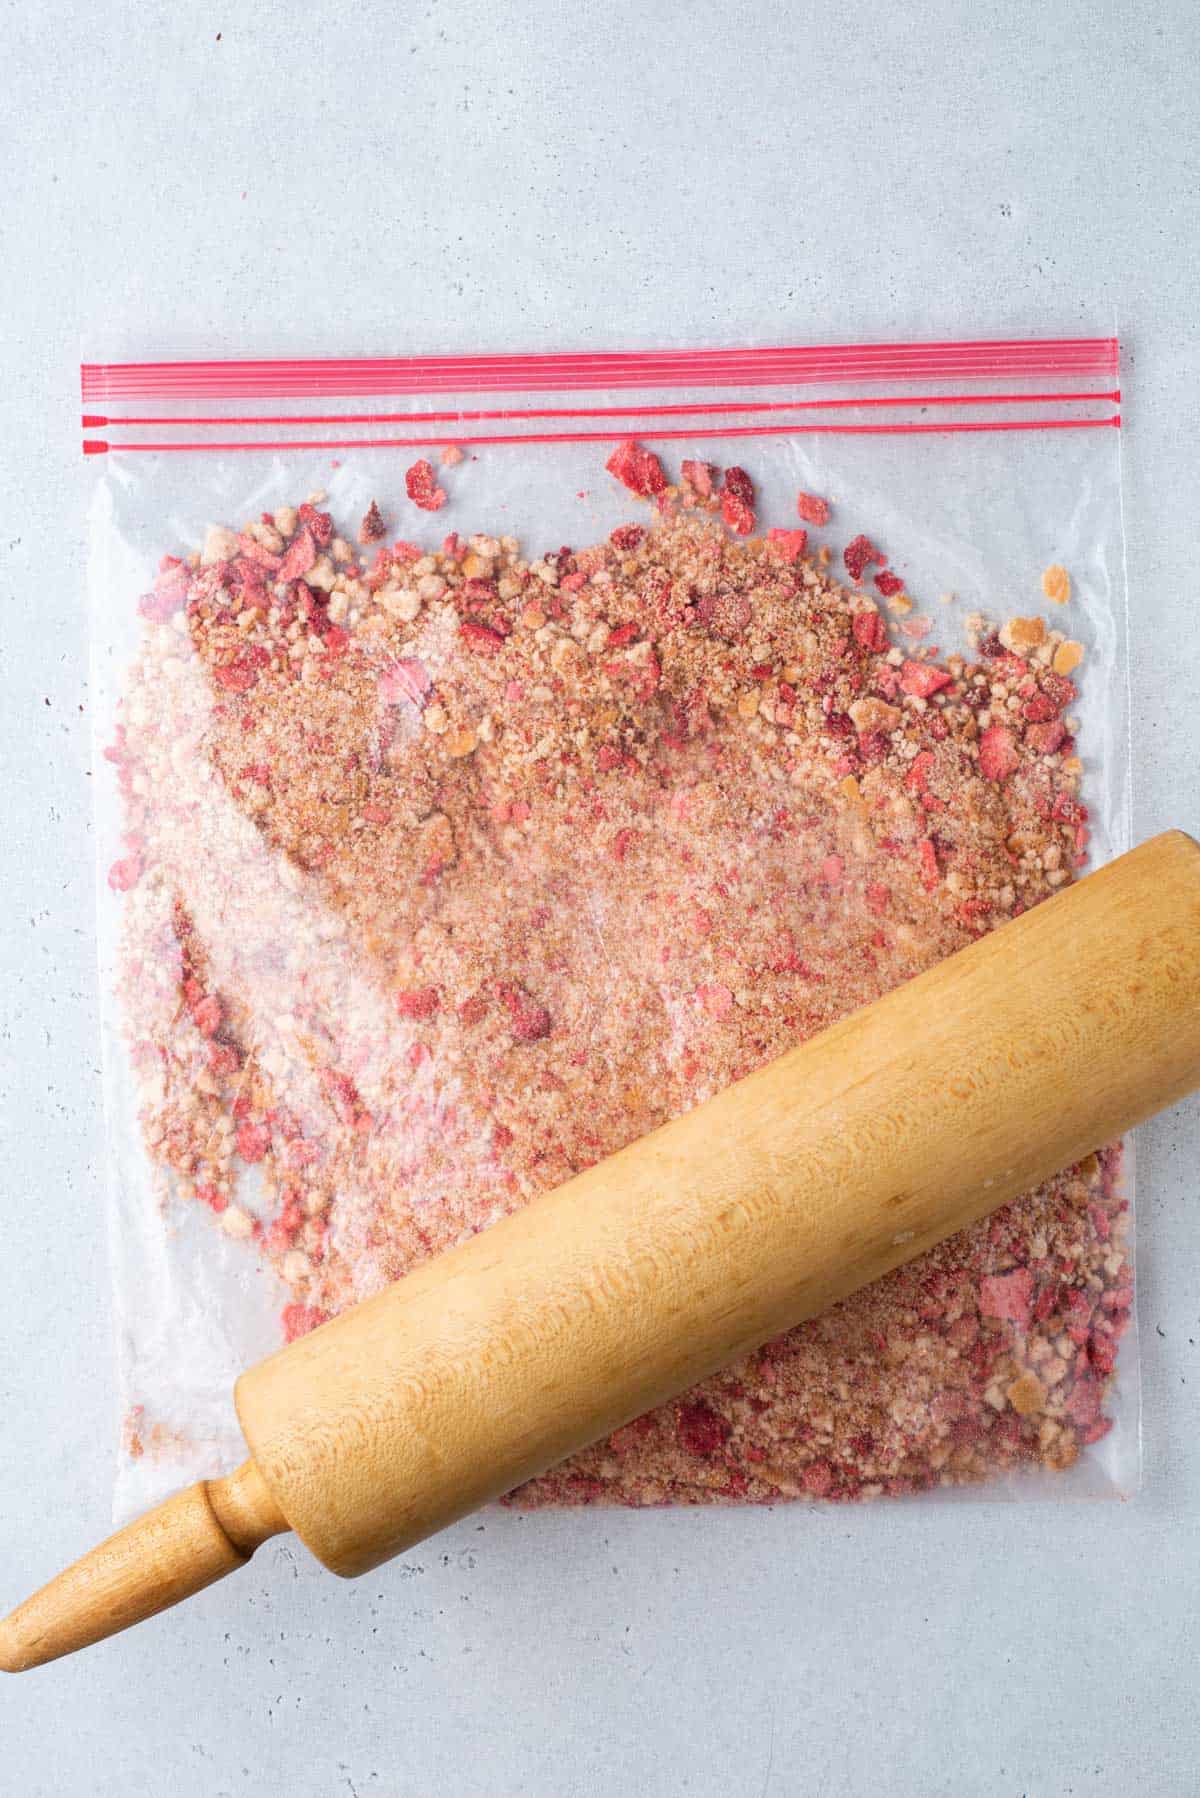 crushed nilla wafers and freeze dried strawberries in a ziploc bag with a rolling pin on top of it